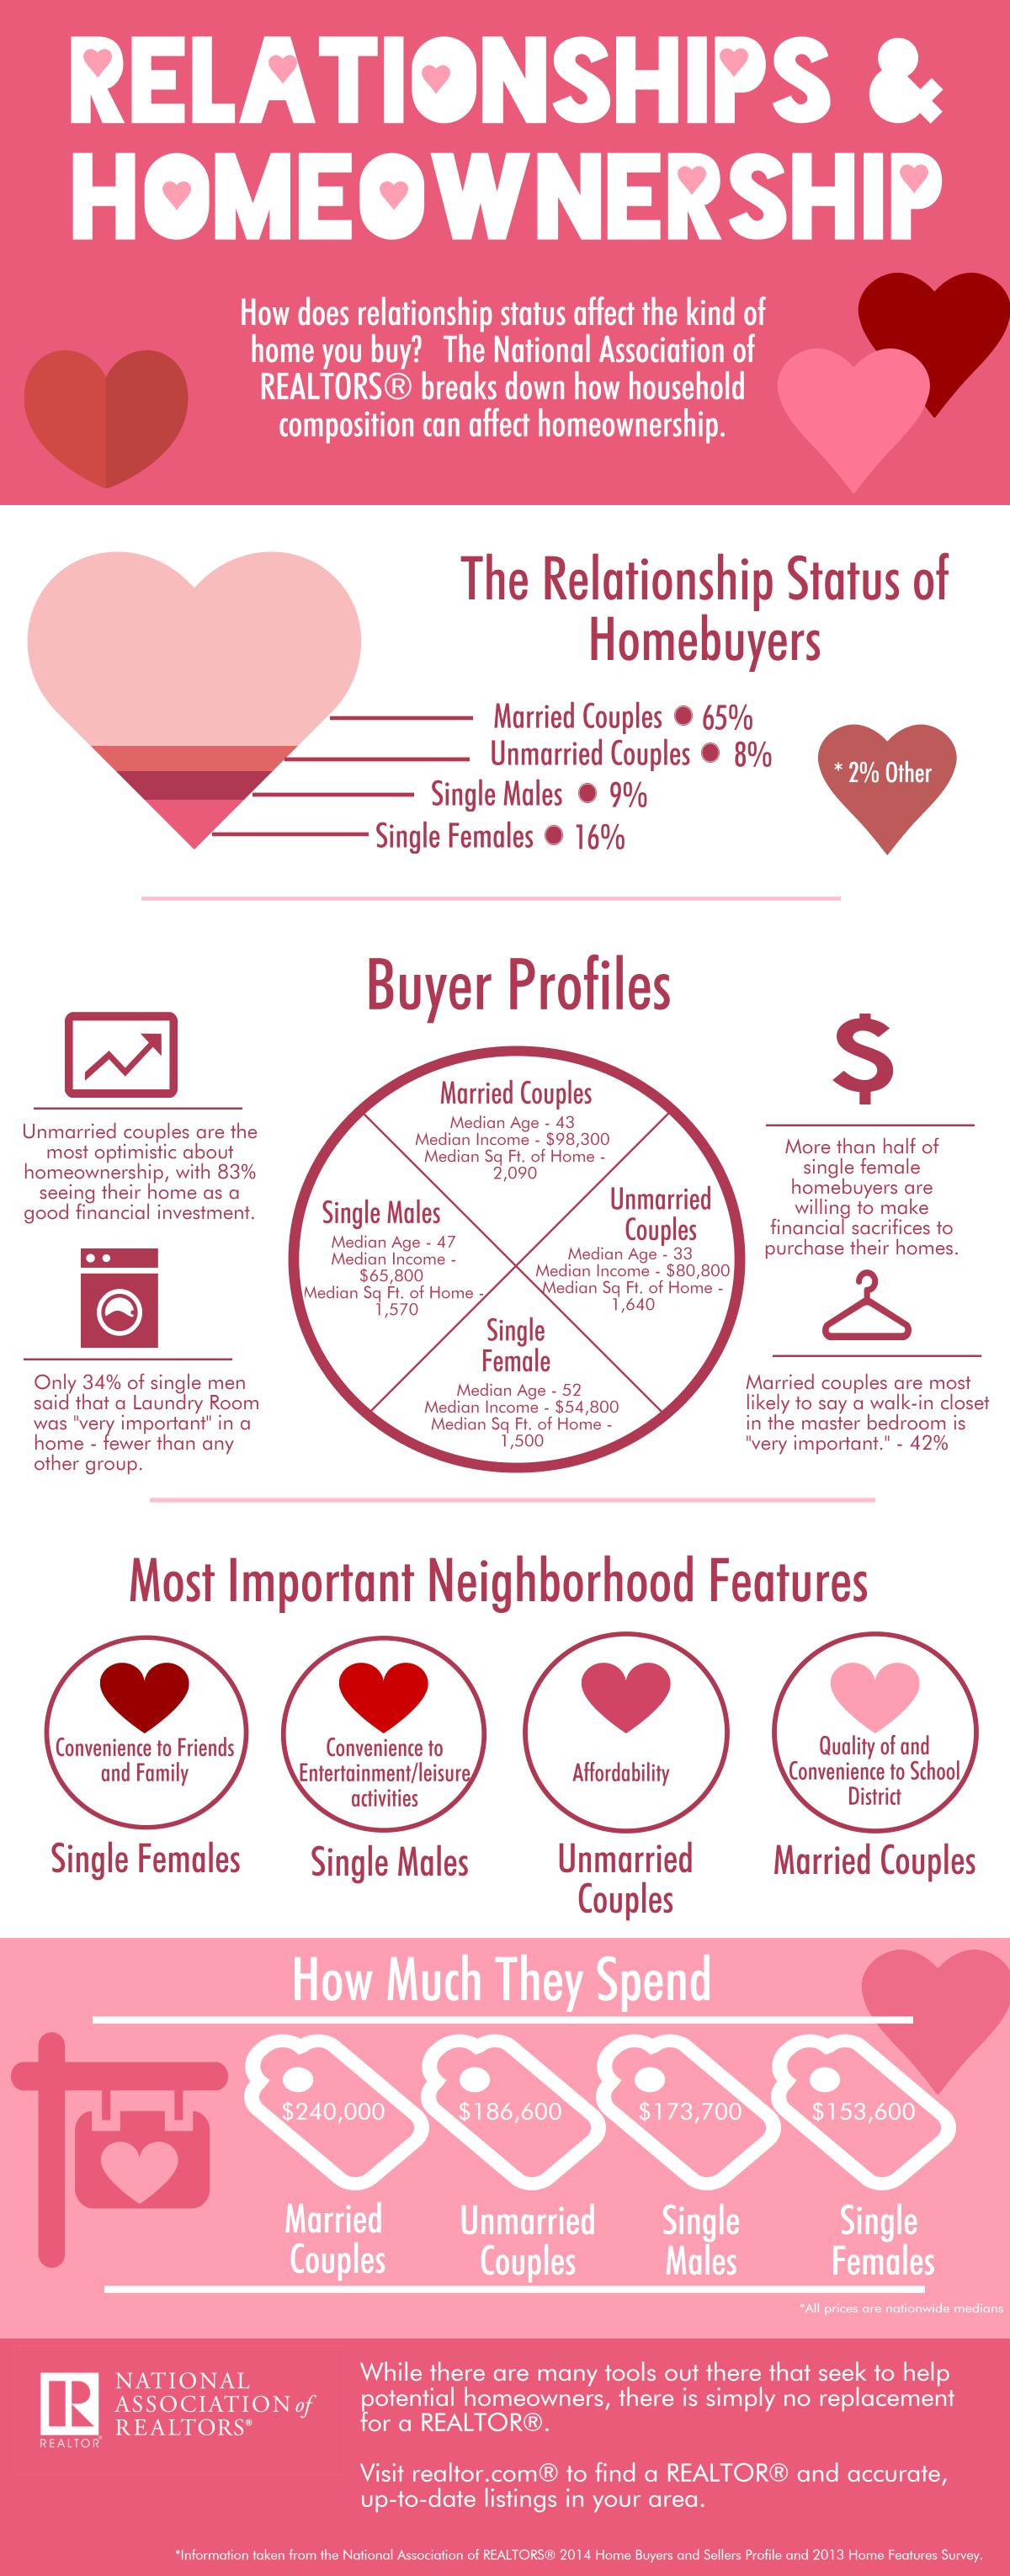 infographic-relationships-and-homeownership-02-09-2015